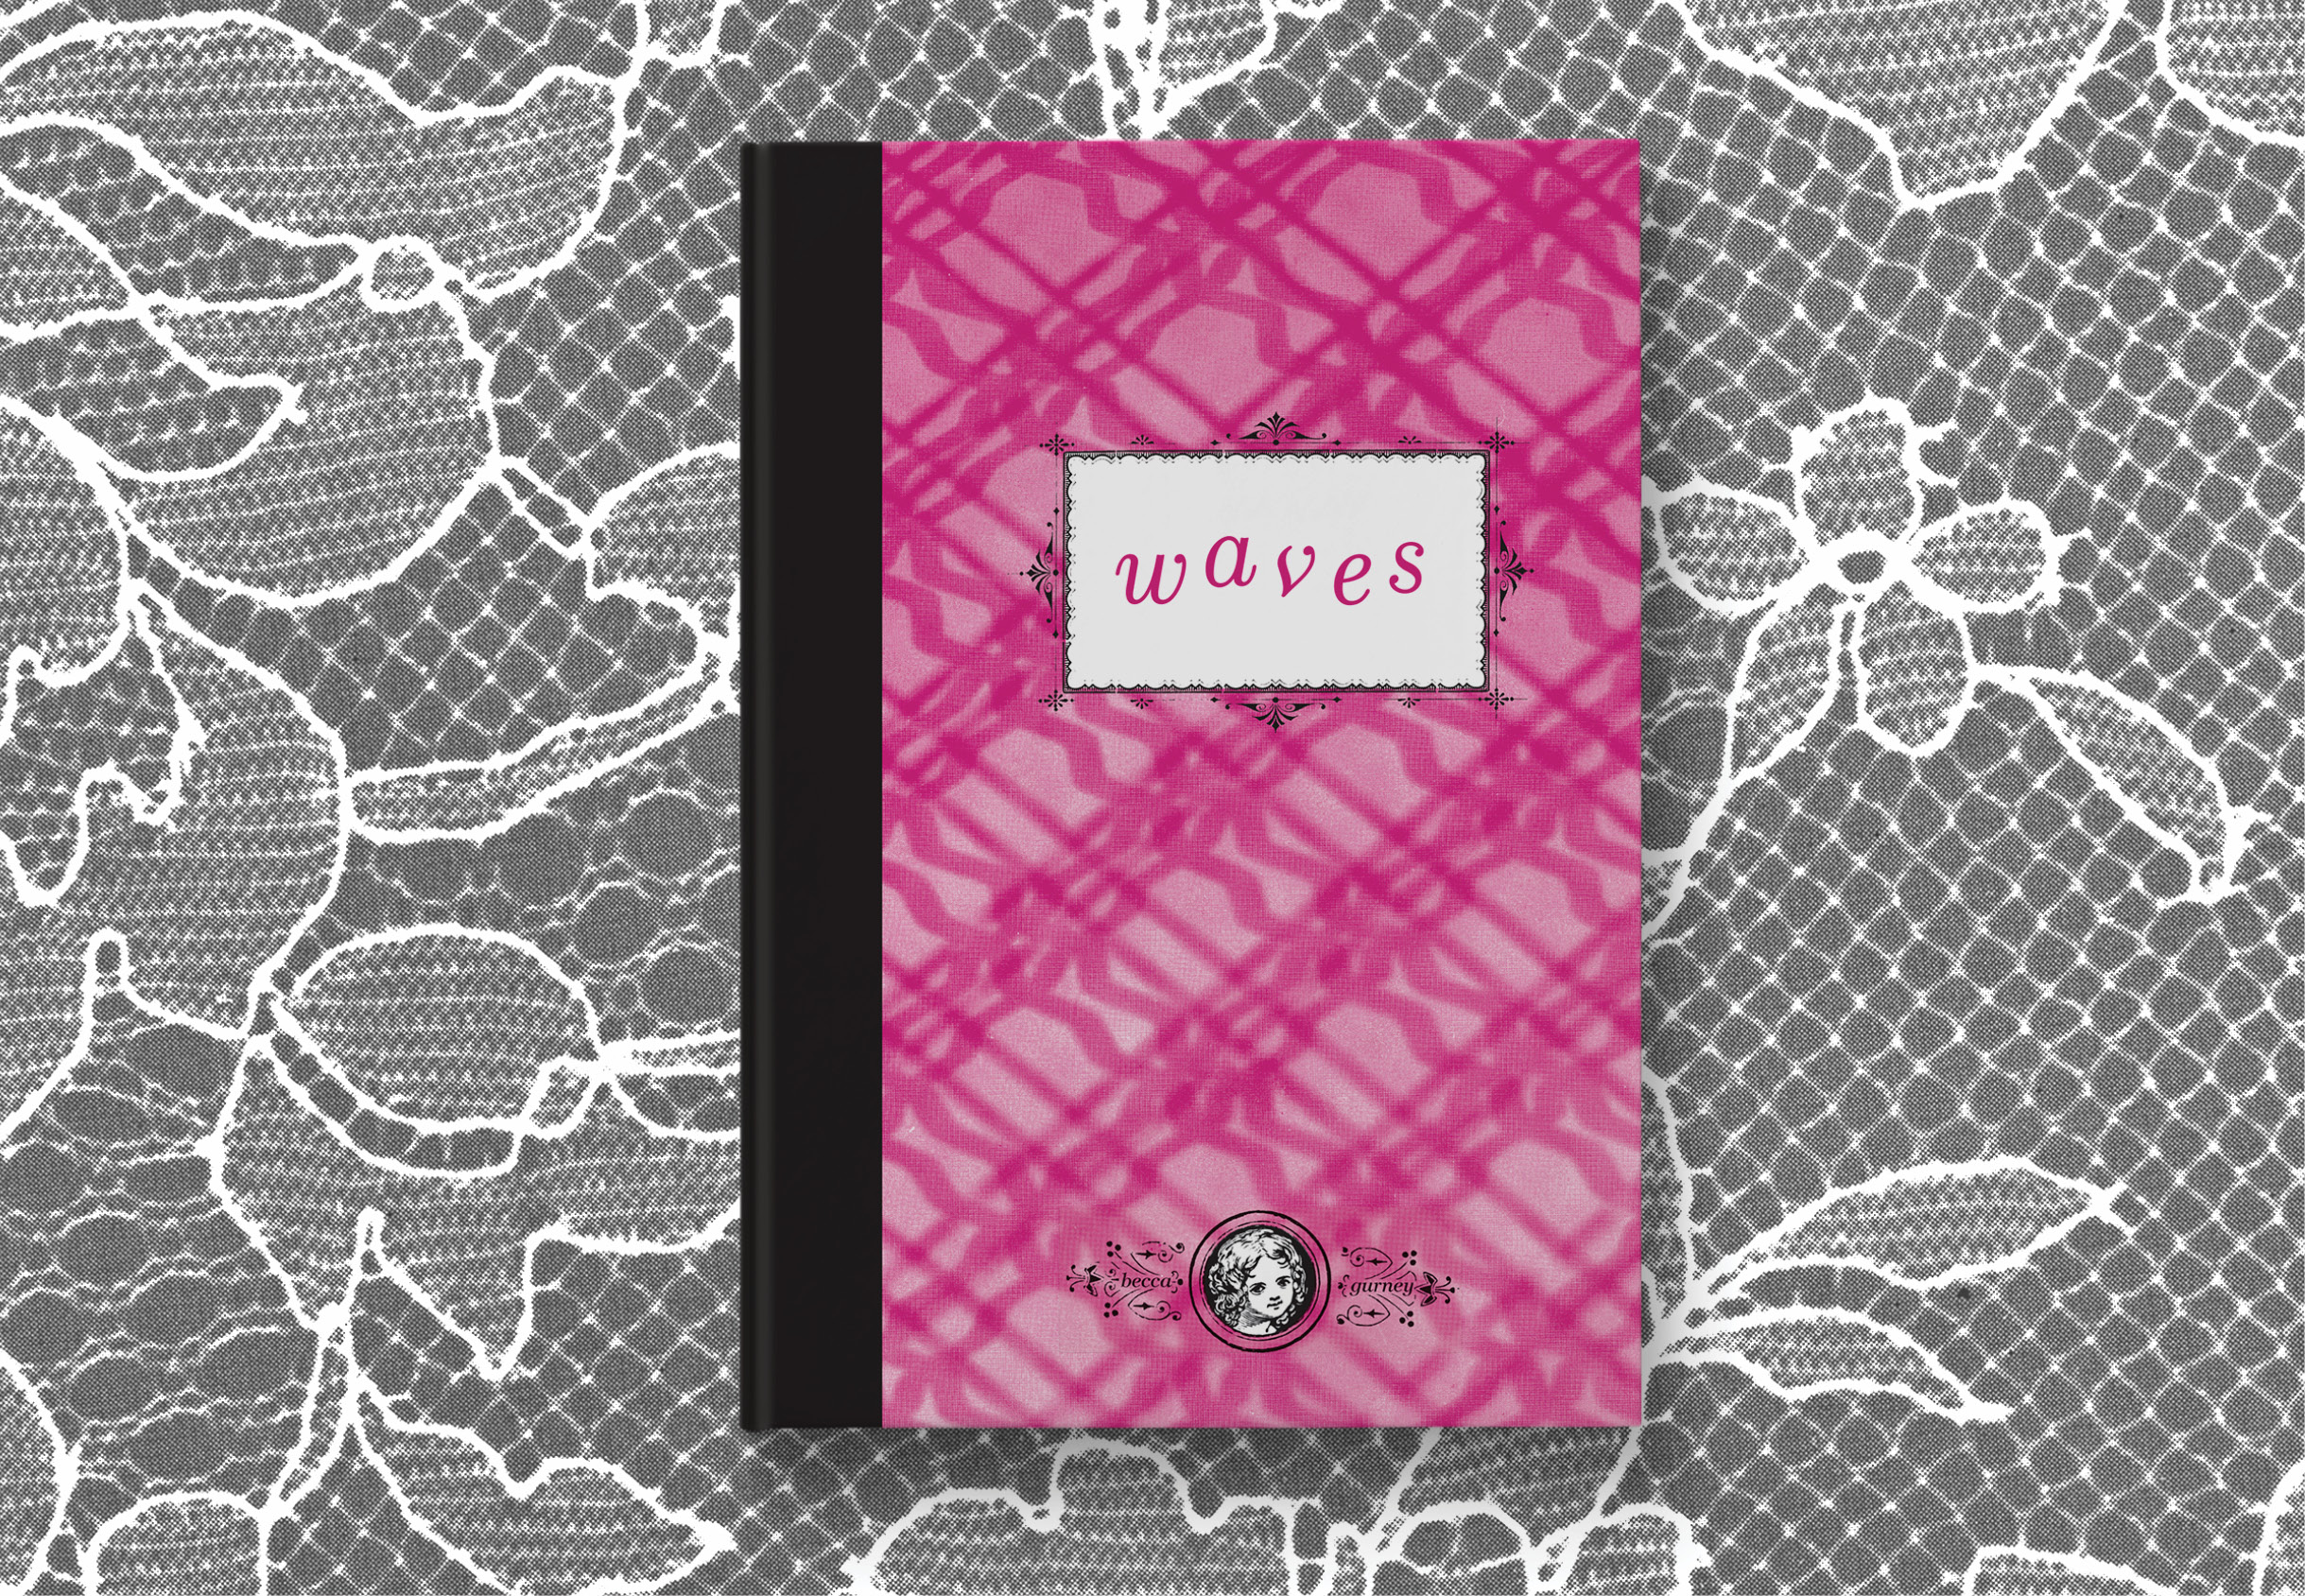 The cover of the hardbound Waves book is a full bleed texture of magenta material with a title plate that is white framed with decorative borders. The book is on a grey lace background.